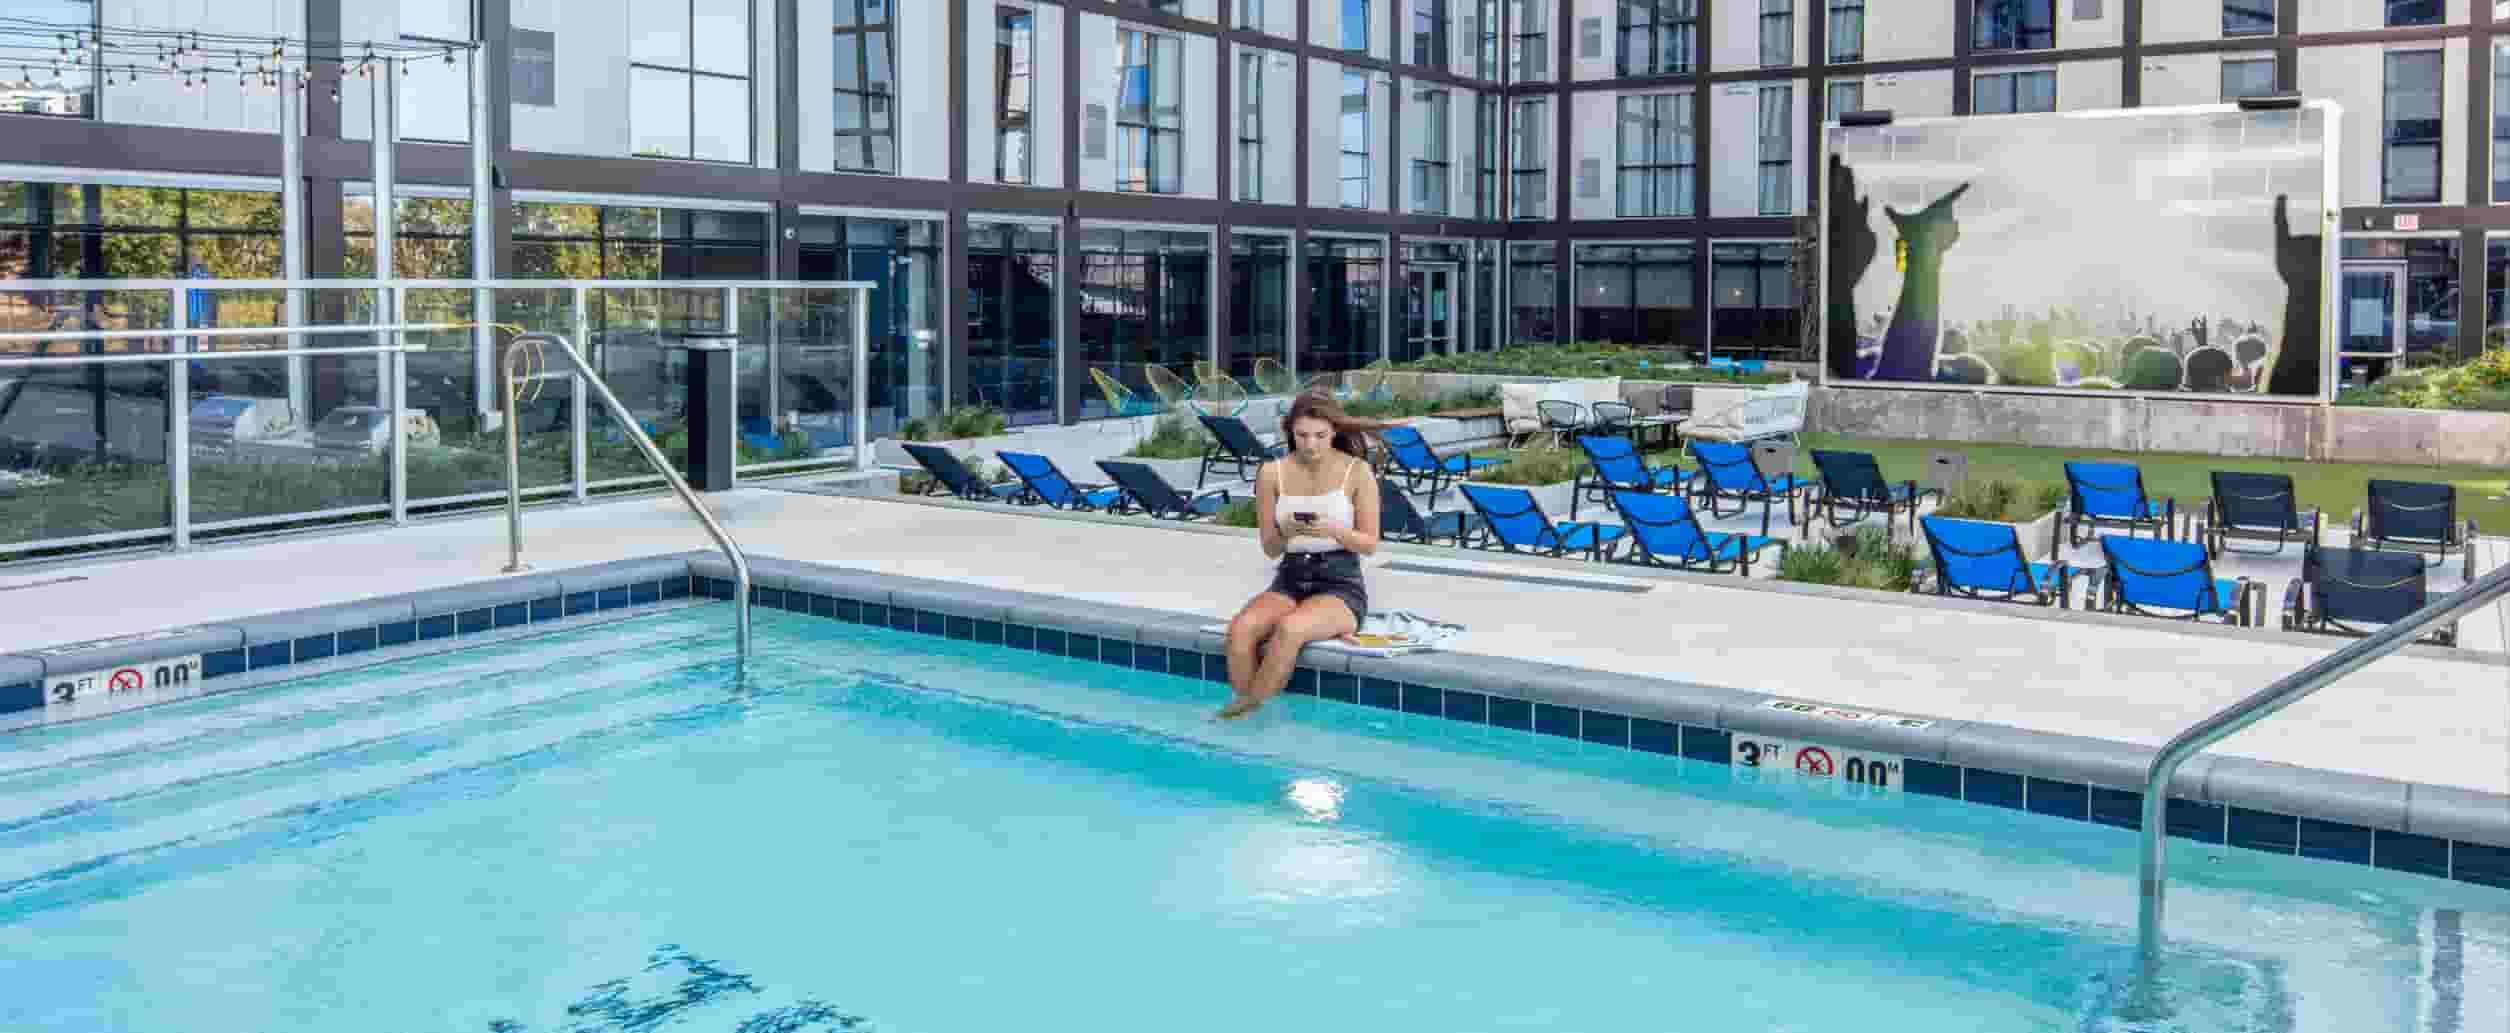 Courtyard pool at Rise at Riverfront Crossings